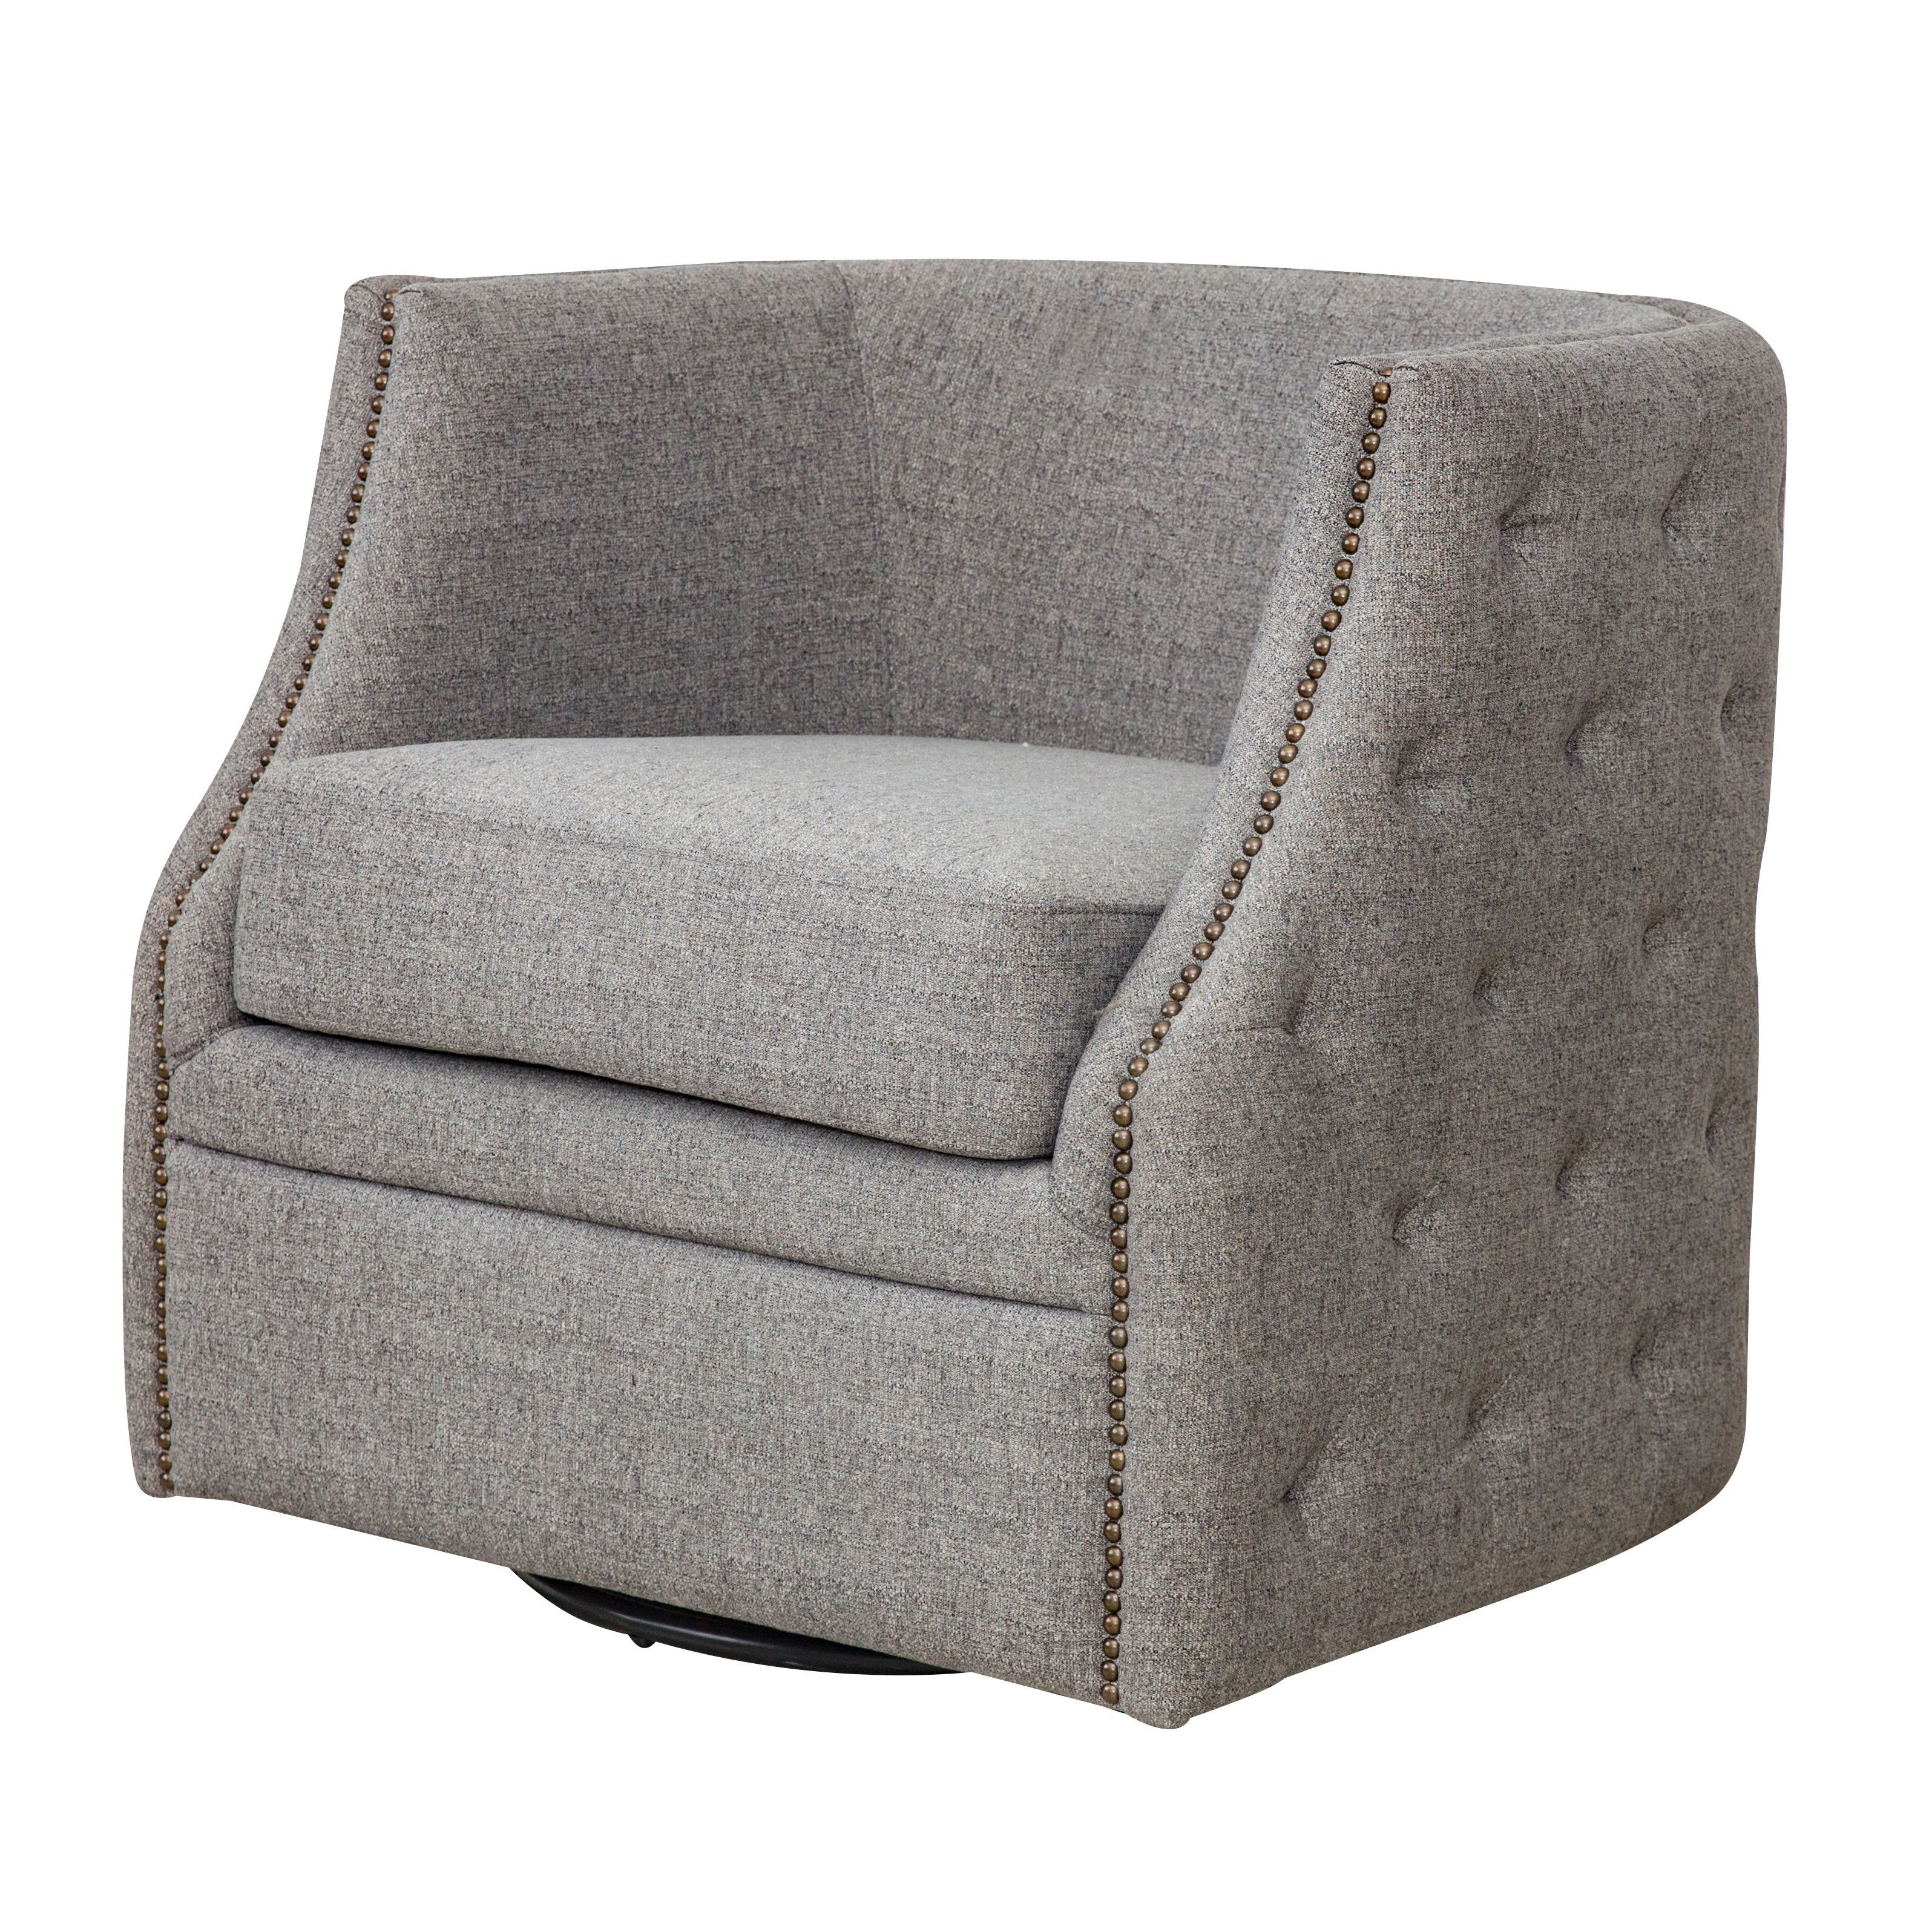 Red Barrel Studio Dichiera Swivel Armchair | Wayfair Within Circuit Swivel Accent Chairs (View 10 of 20)